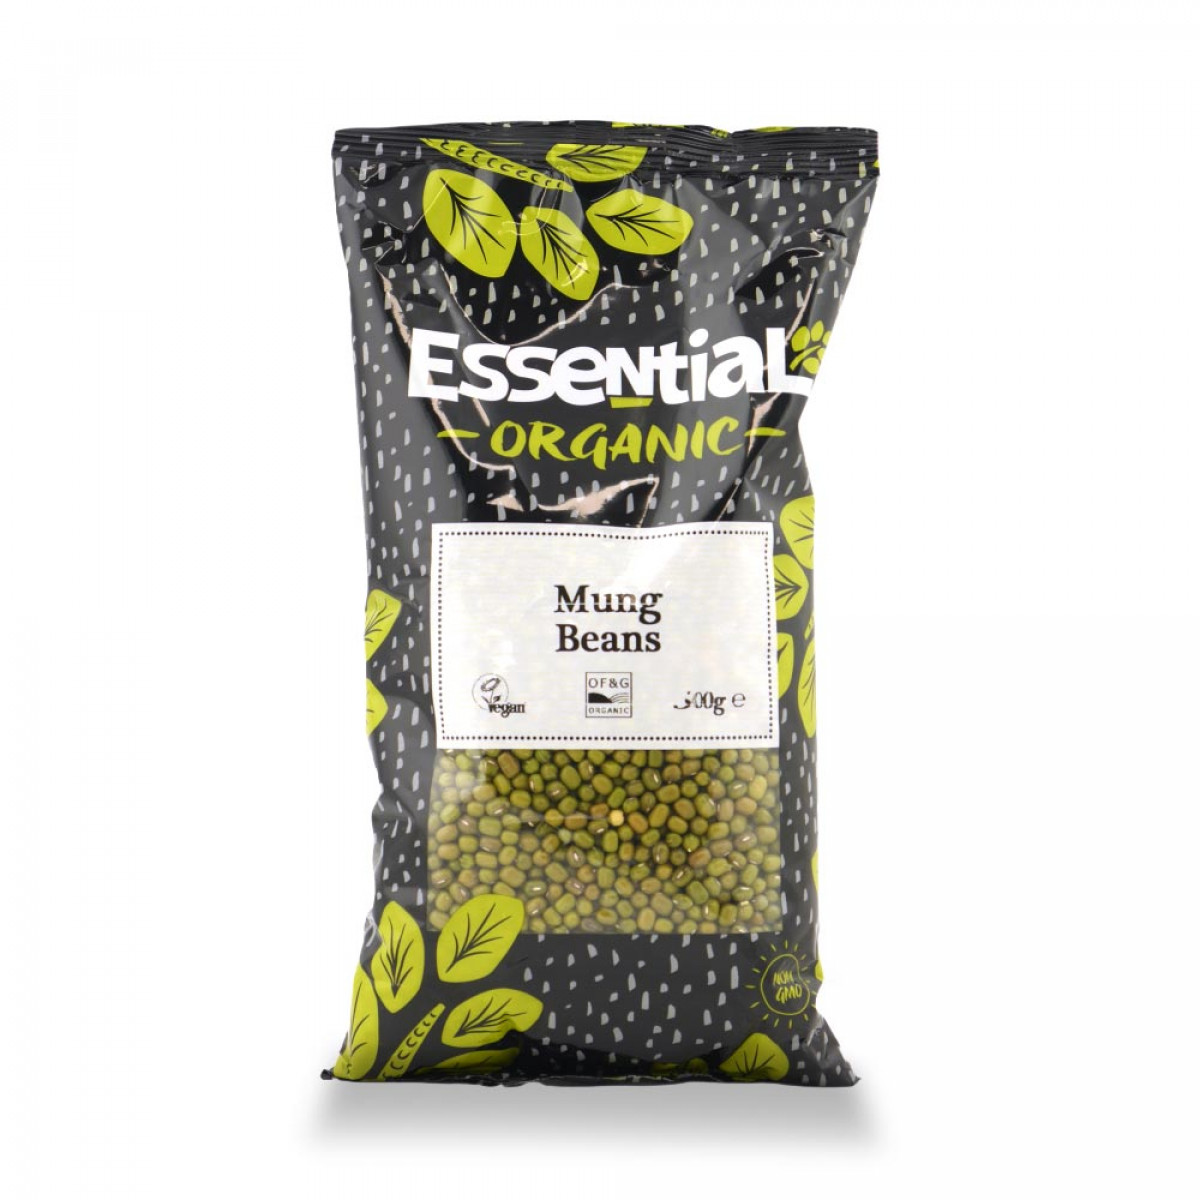 Product picture for Mung Beans